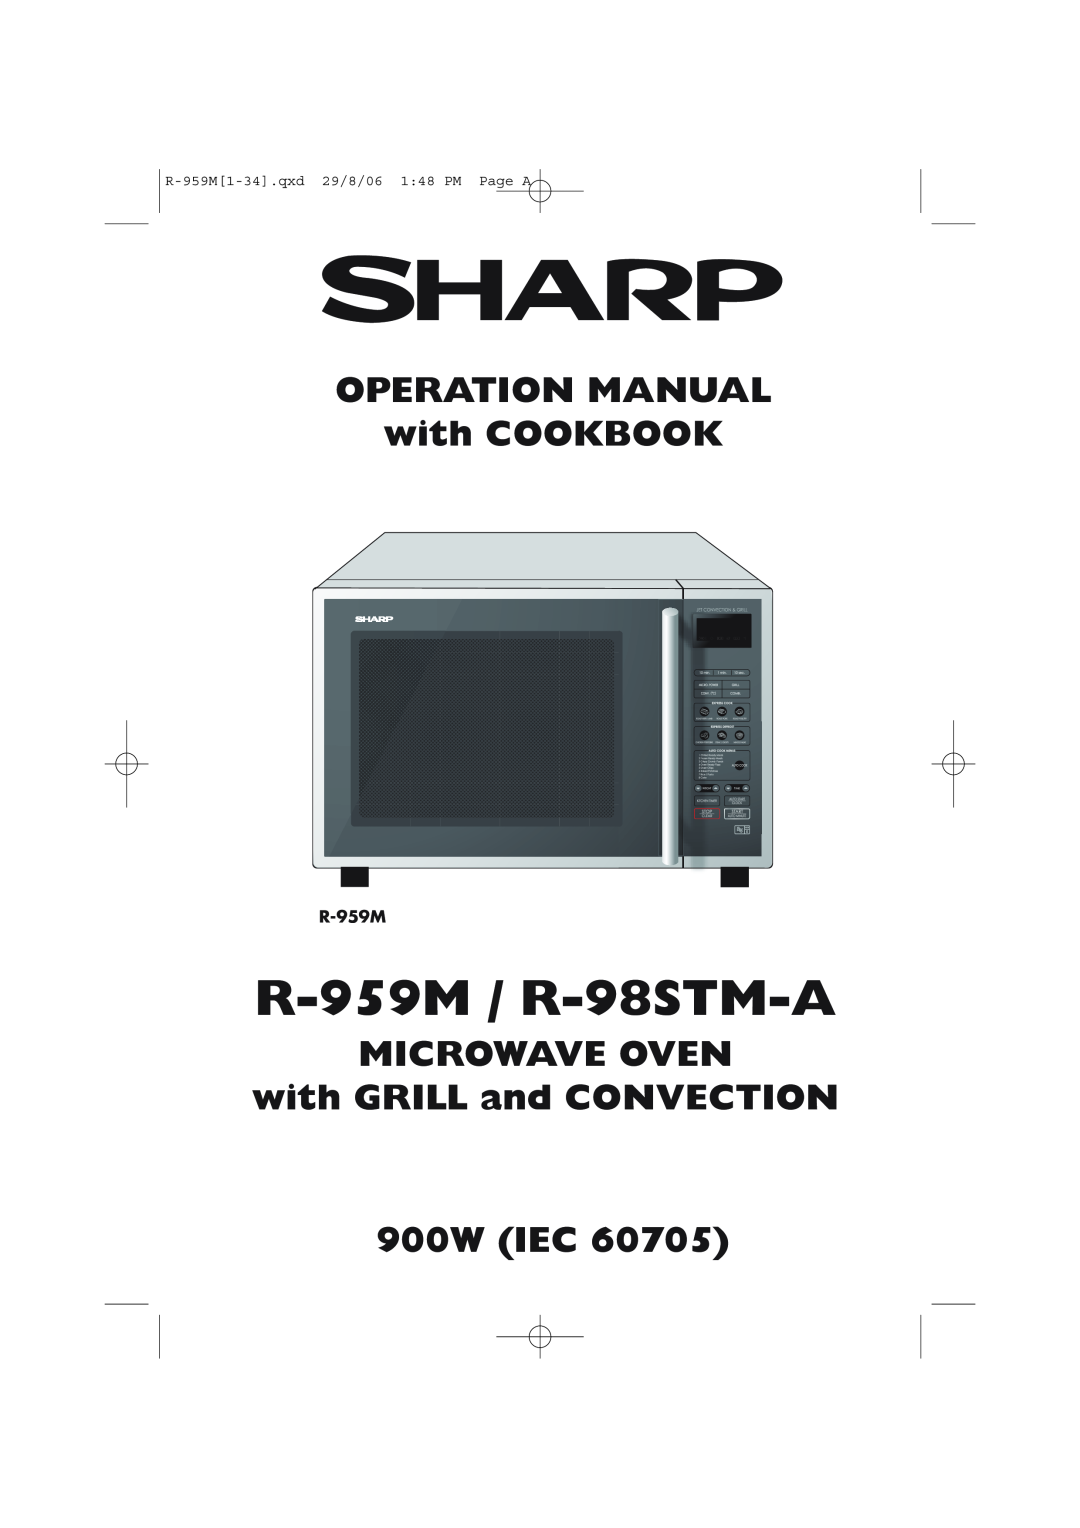 Sharp operation manual R-959M / R-98STM-A, MICROWAVE OVEN with GRILL and CONVECTION, 900W IEC 